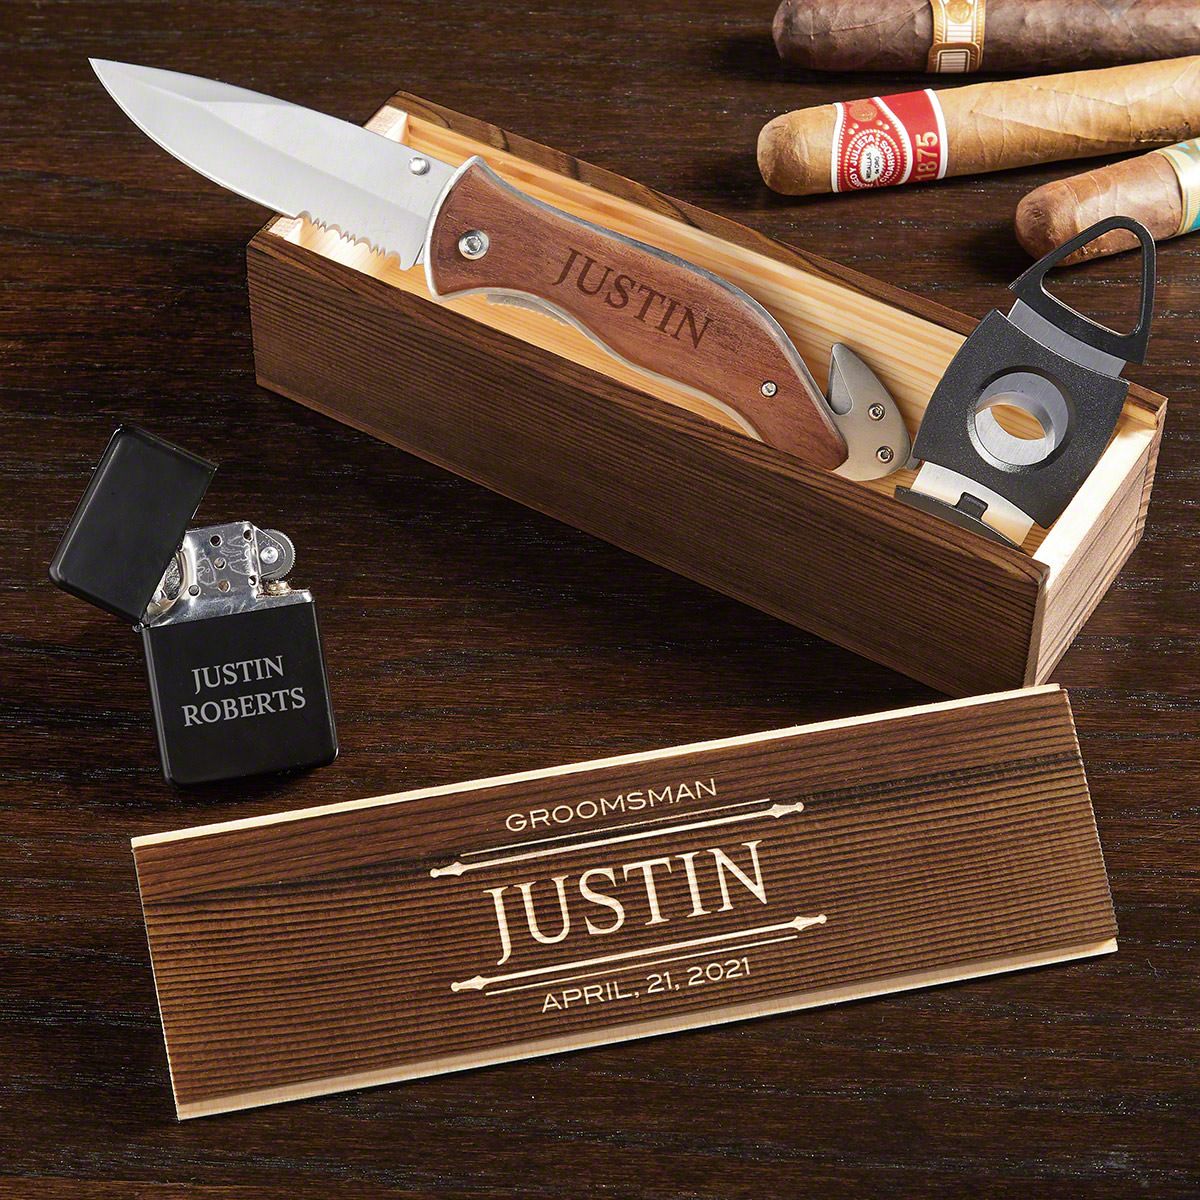 https://images.homewetbar.com/media/catalog/product/8/1/8198-stanford-cigar-box-set-with-lighter-and-knife-primary.jpg?store=default&image-type=image